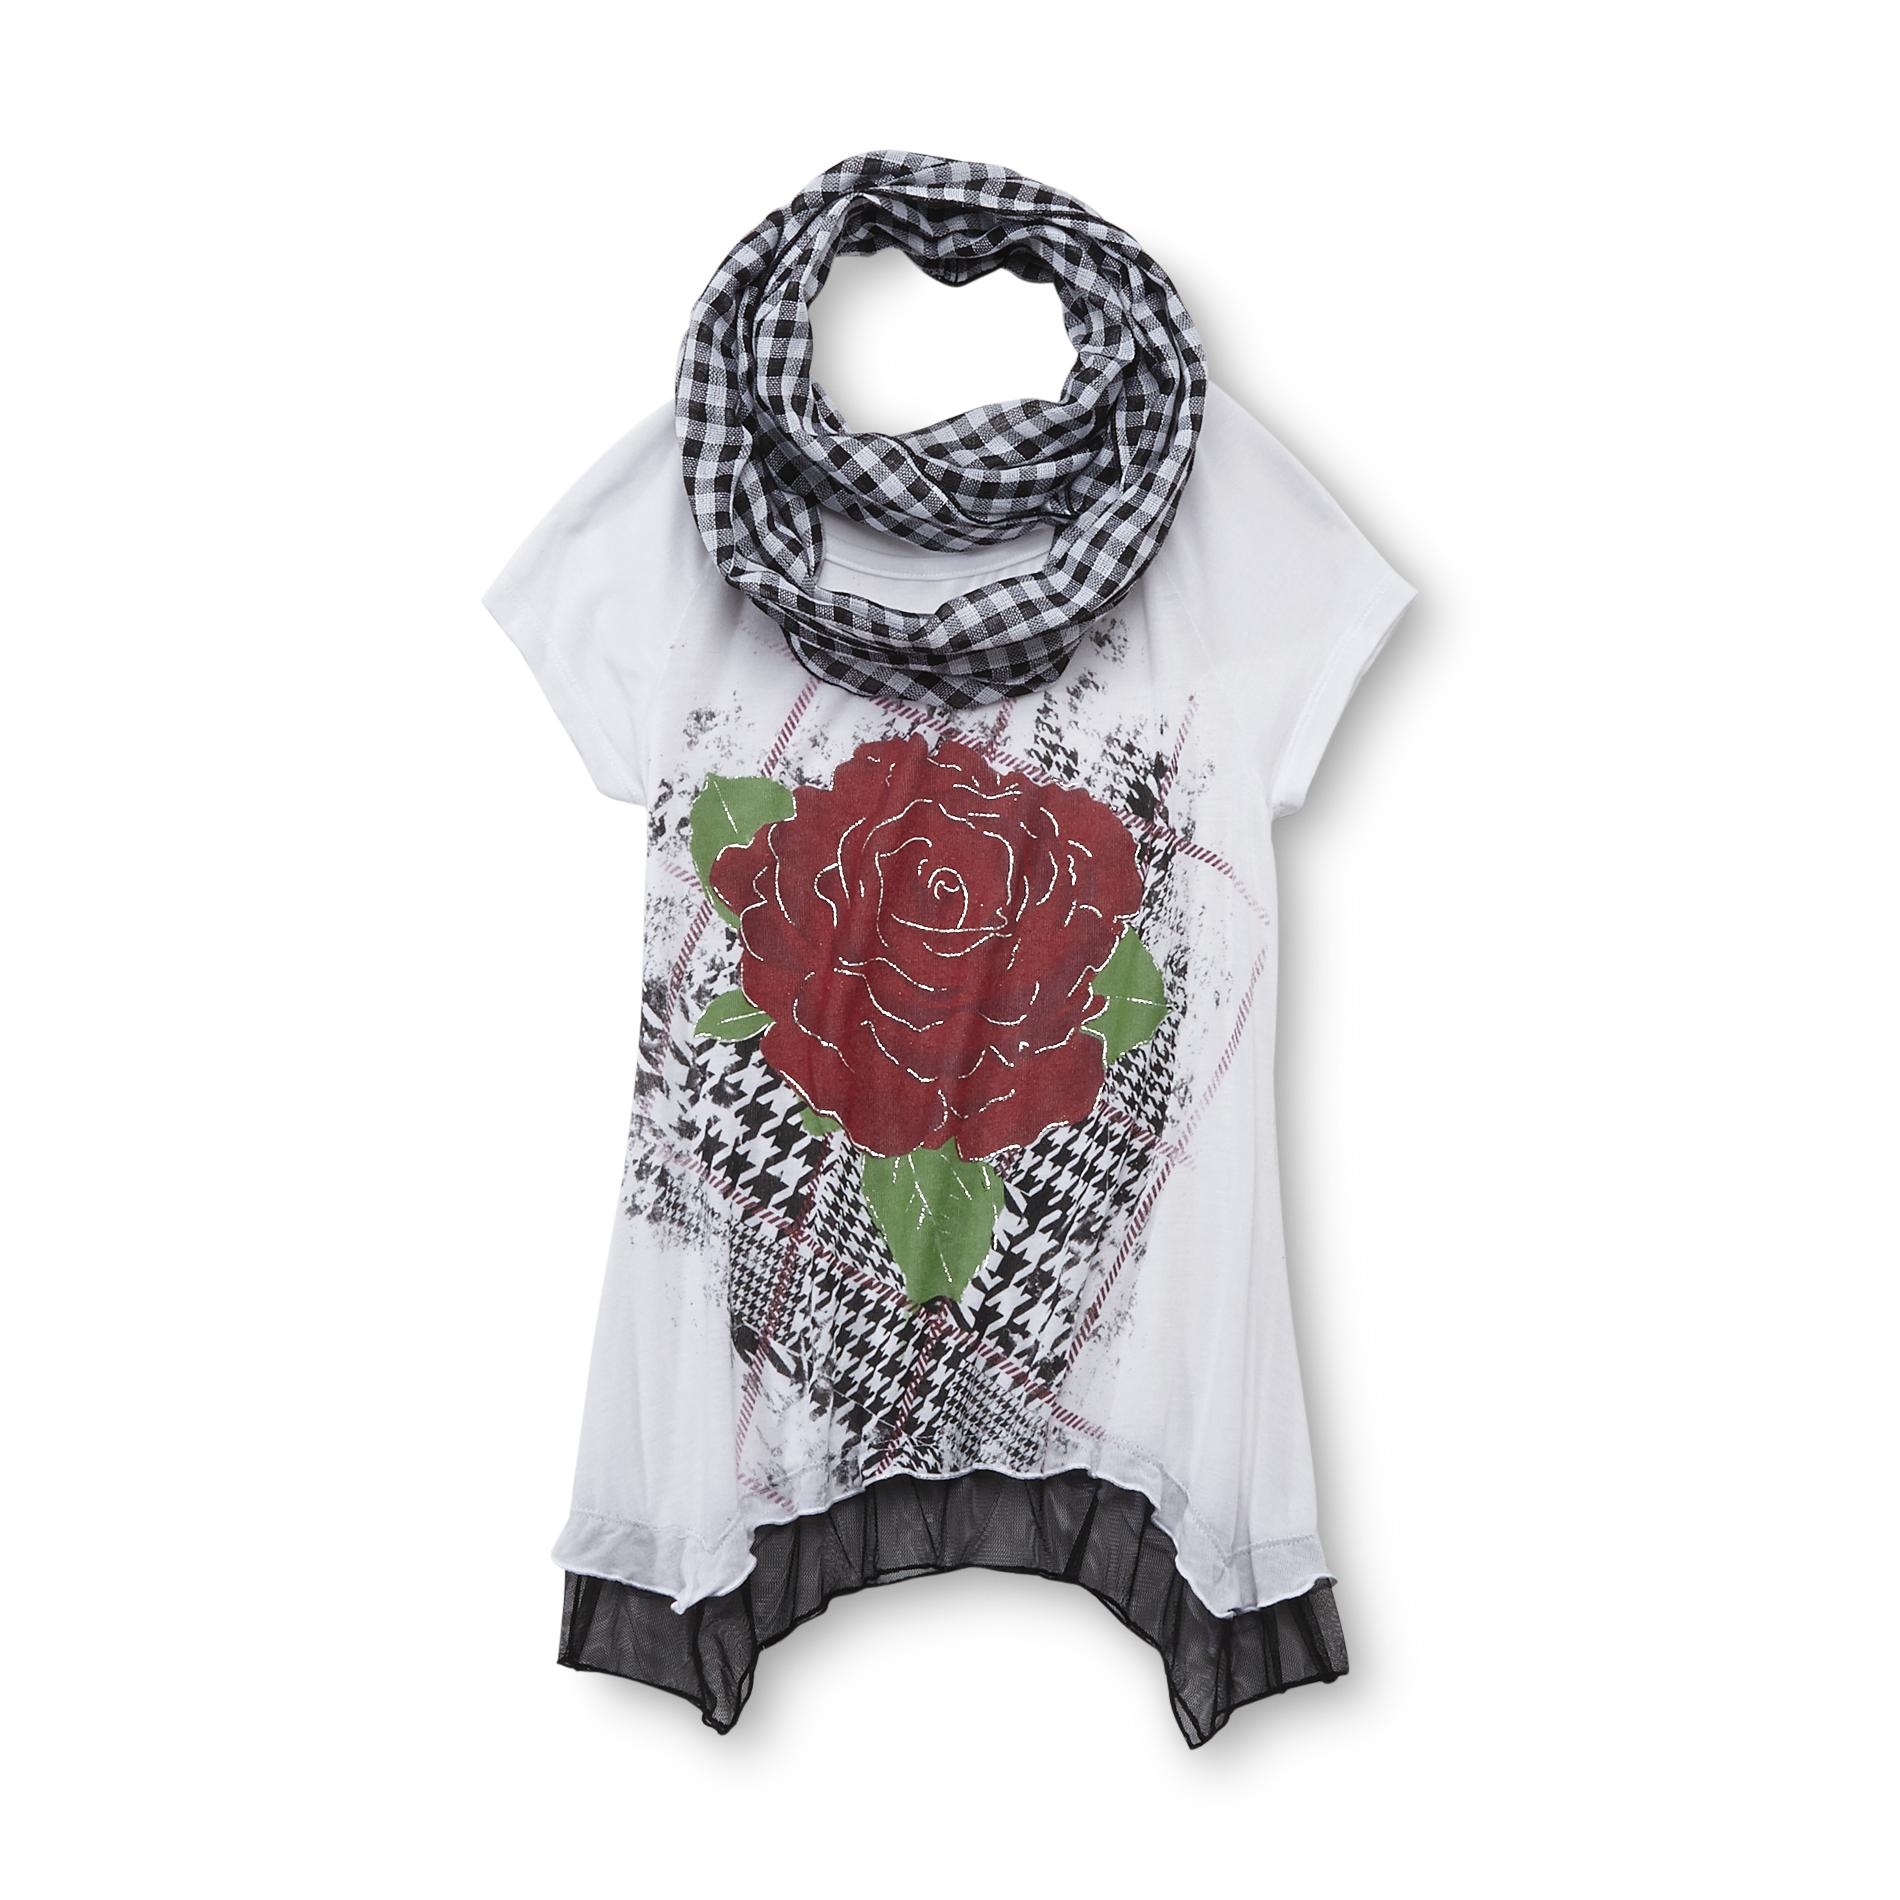 Knitworks Kids Girl's Graphic T-Shirt & Infinity Scarf - Rose